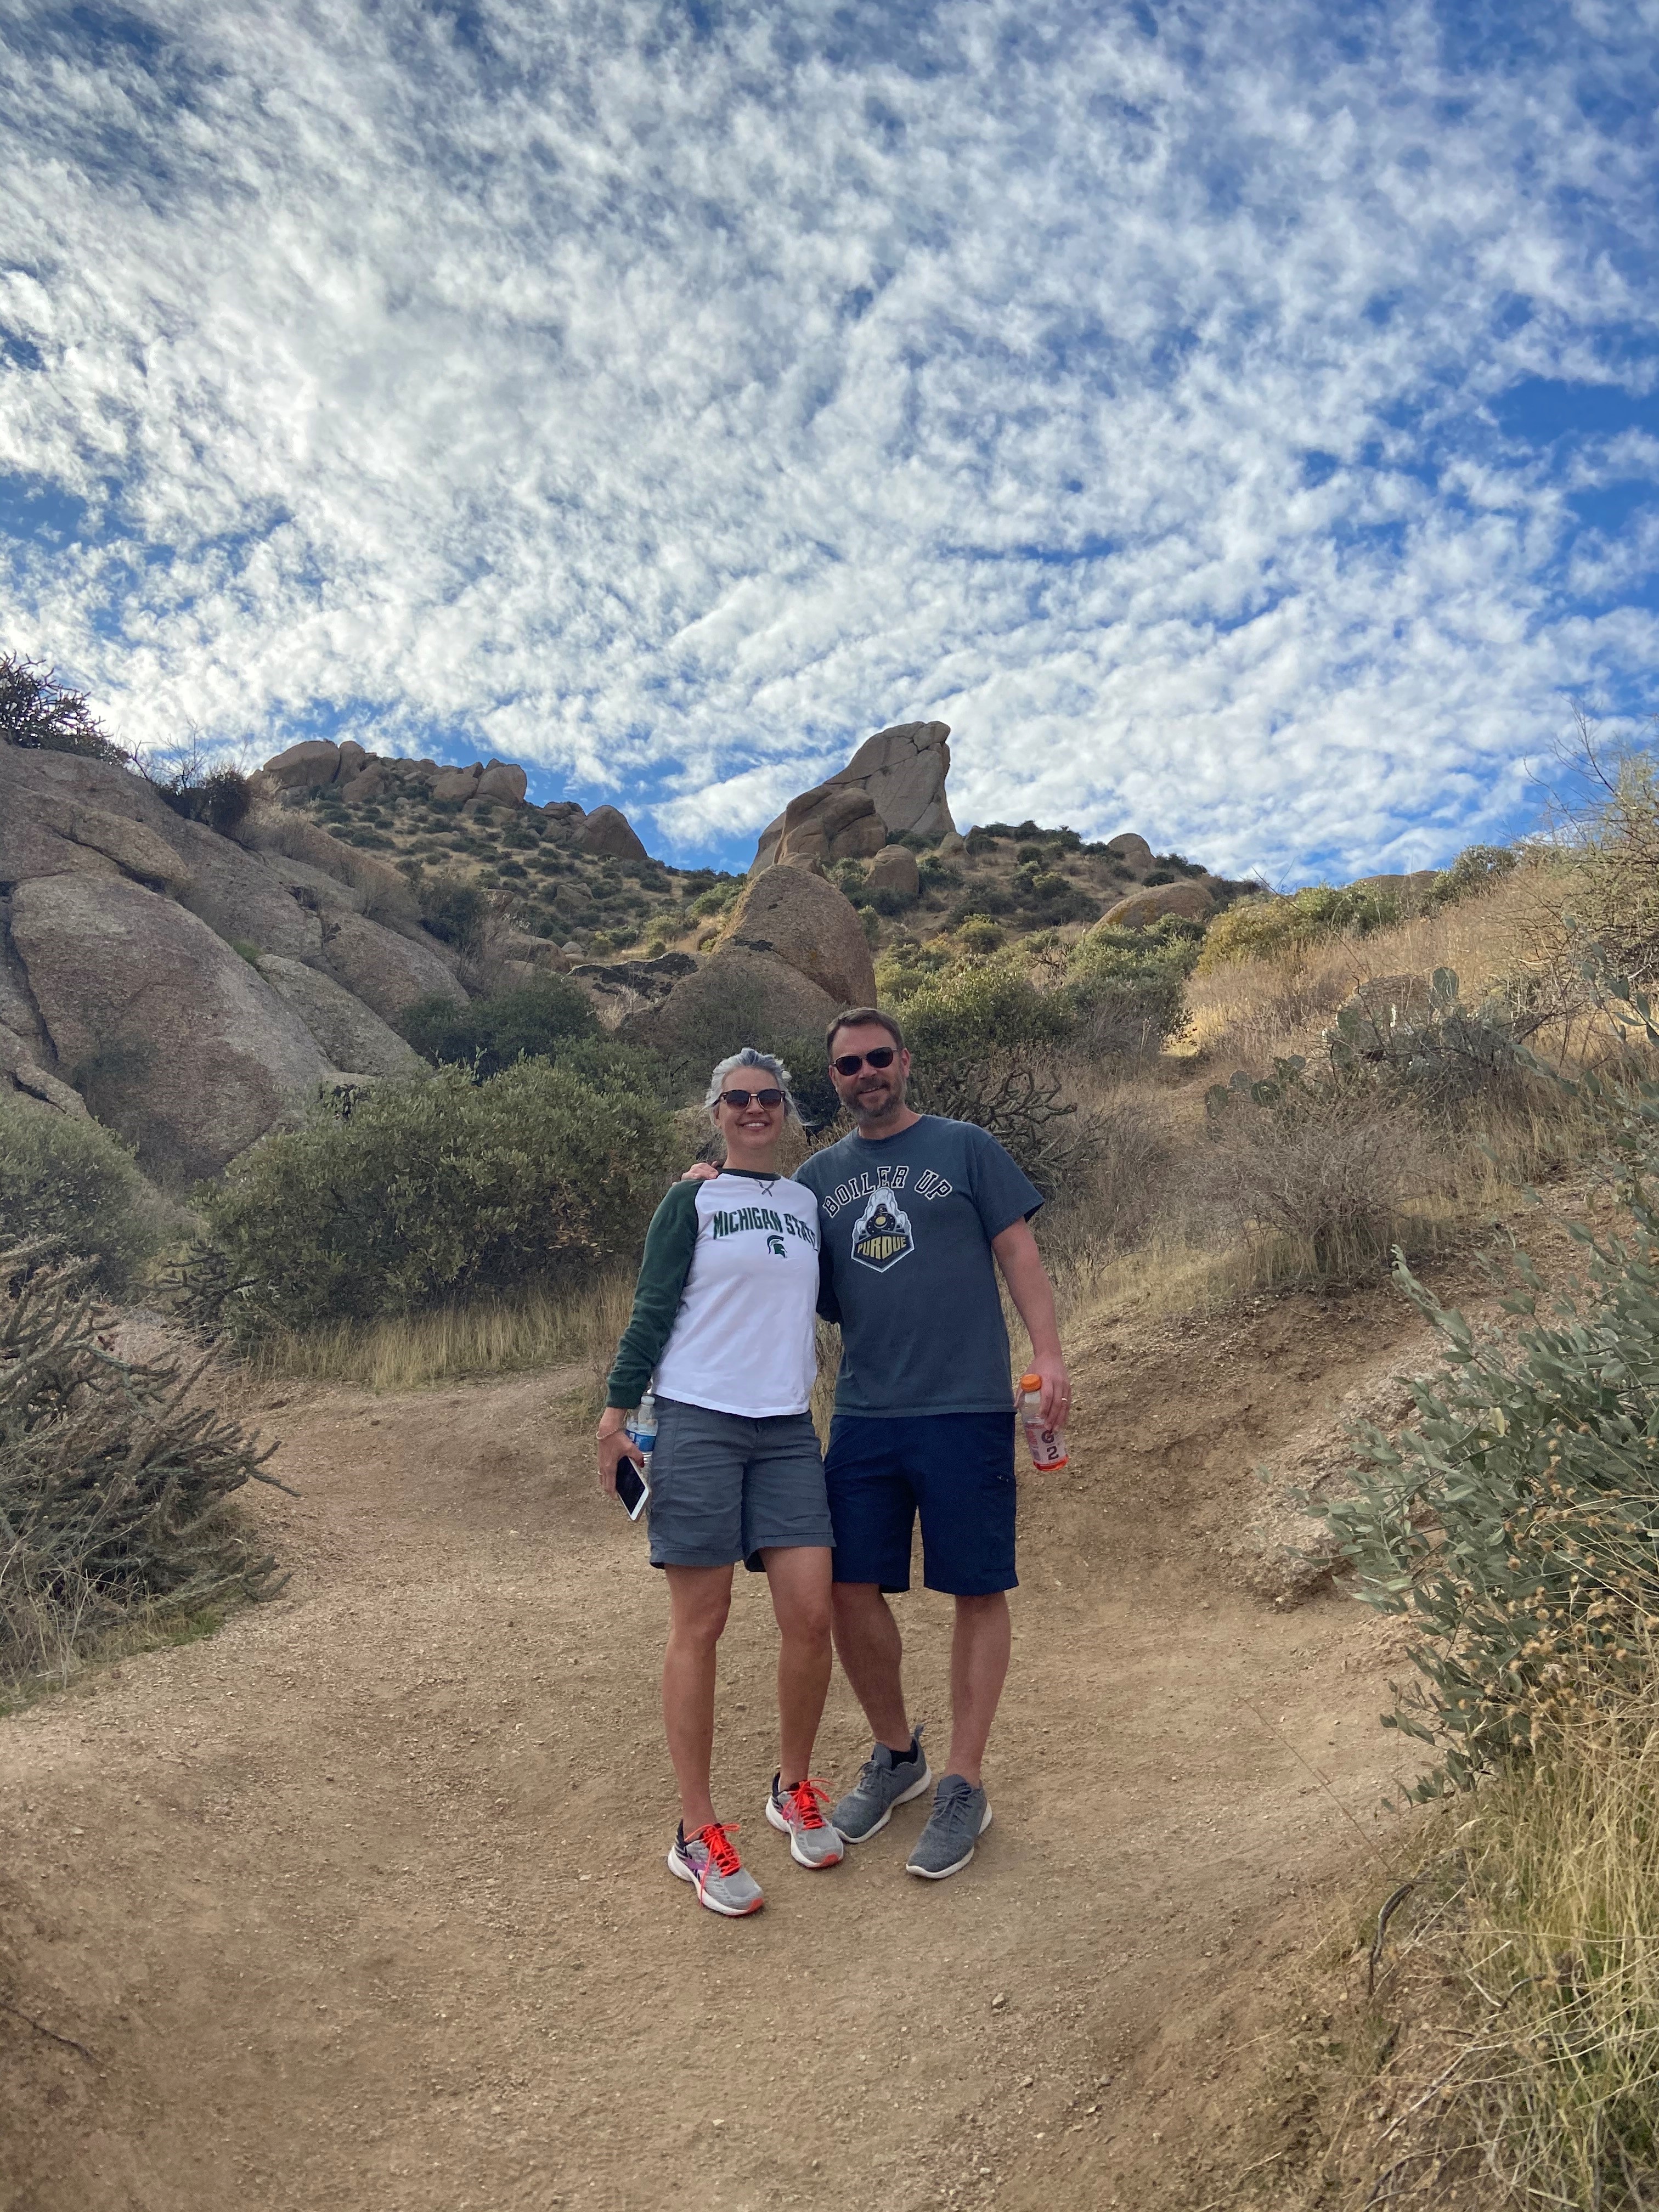 Man and woman standing in desert wearing hiking clothes.